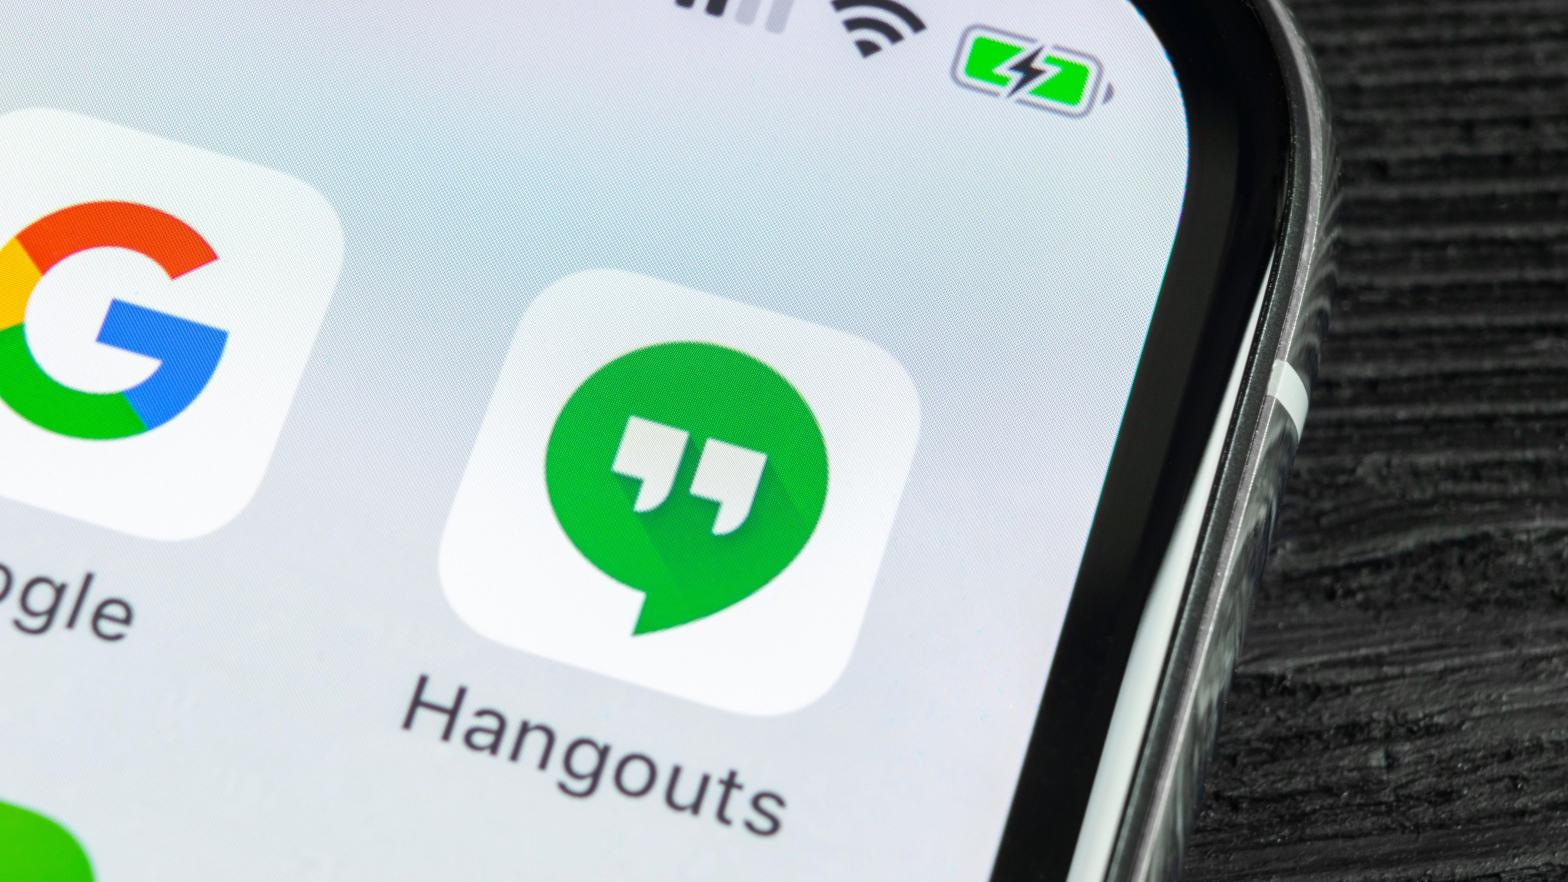 Just imagine the Google app icon growing teeth, then crawling over to the Hangouts icon while it opens its jaws wide. (Photo: BigTunaOnline, Shutterstock)